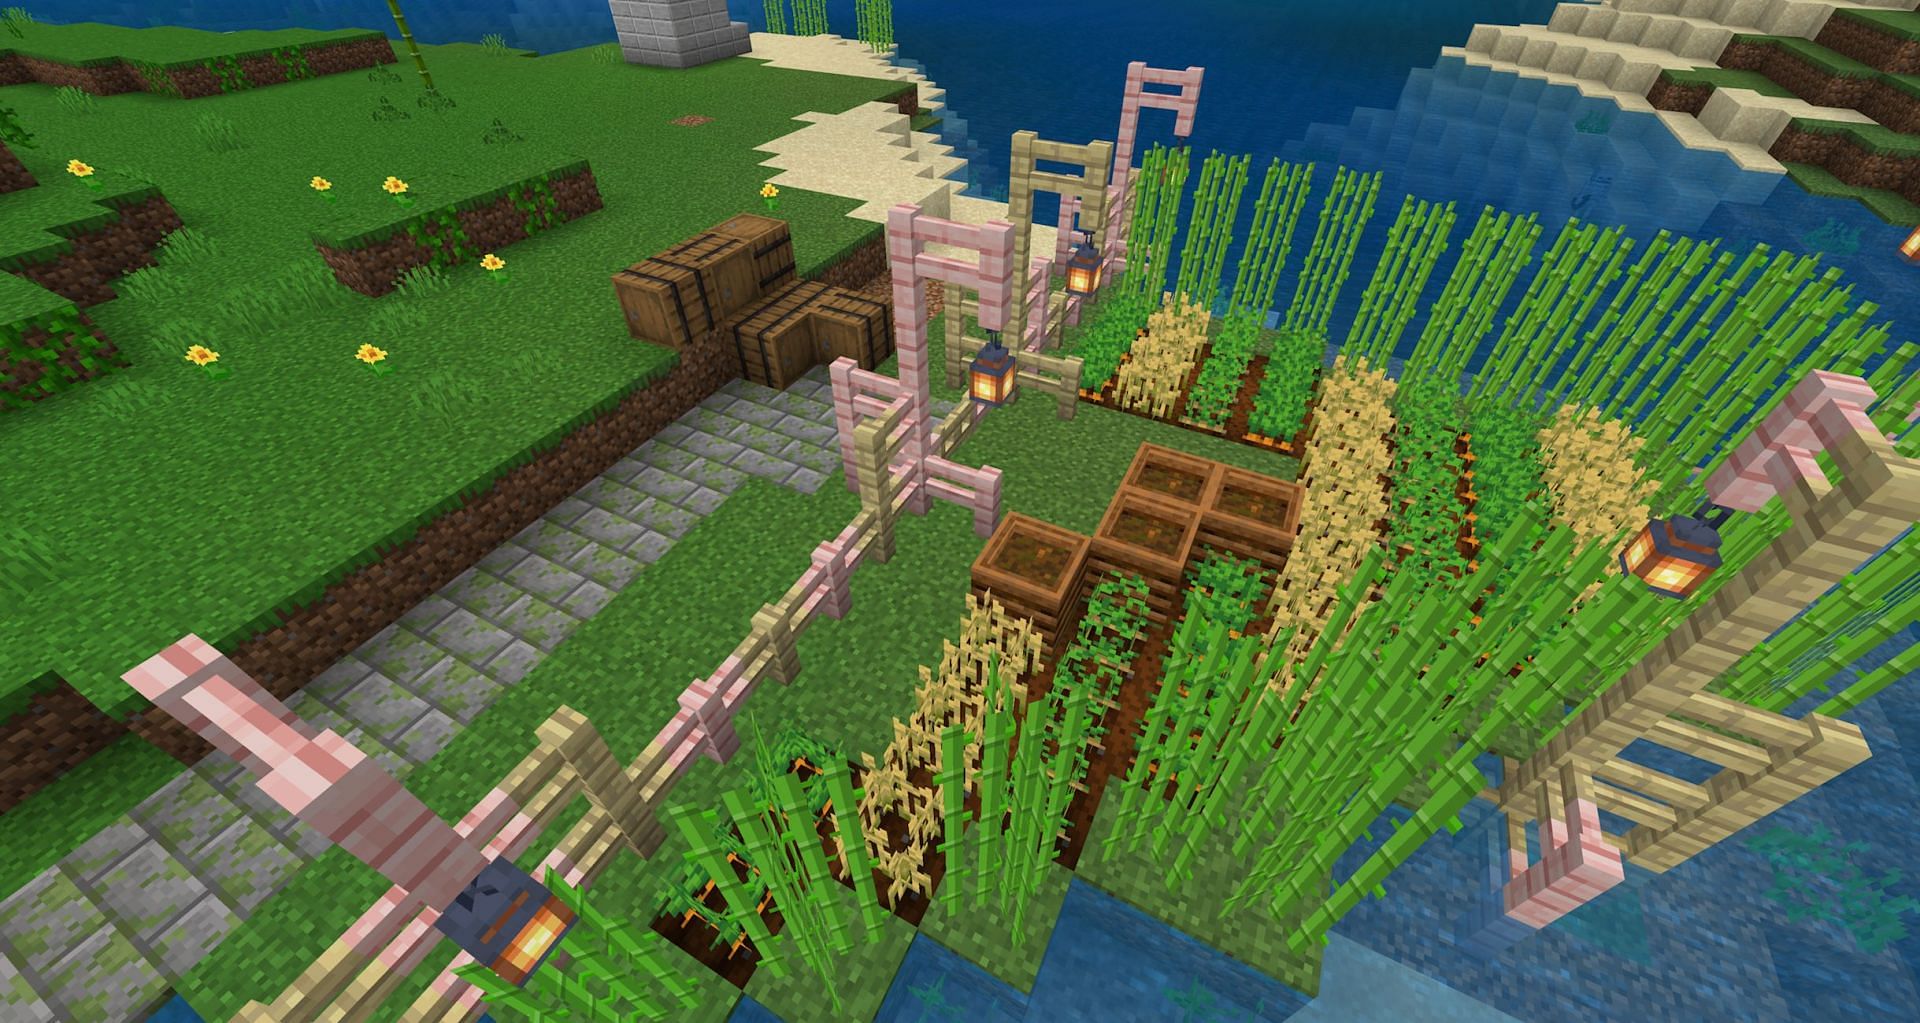 Getting a starter farm set up should be an early priority. (Image via Mojang)